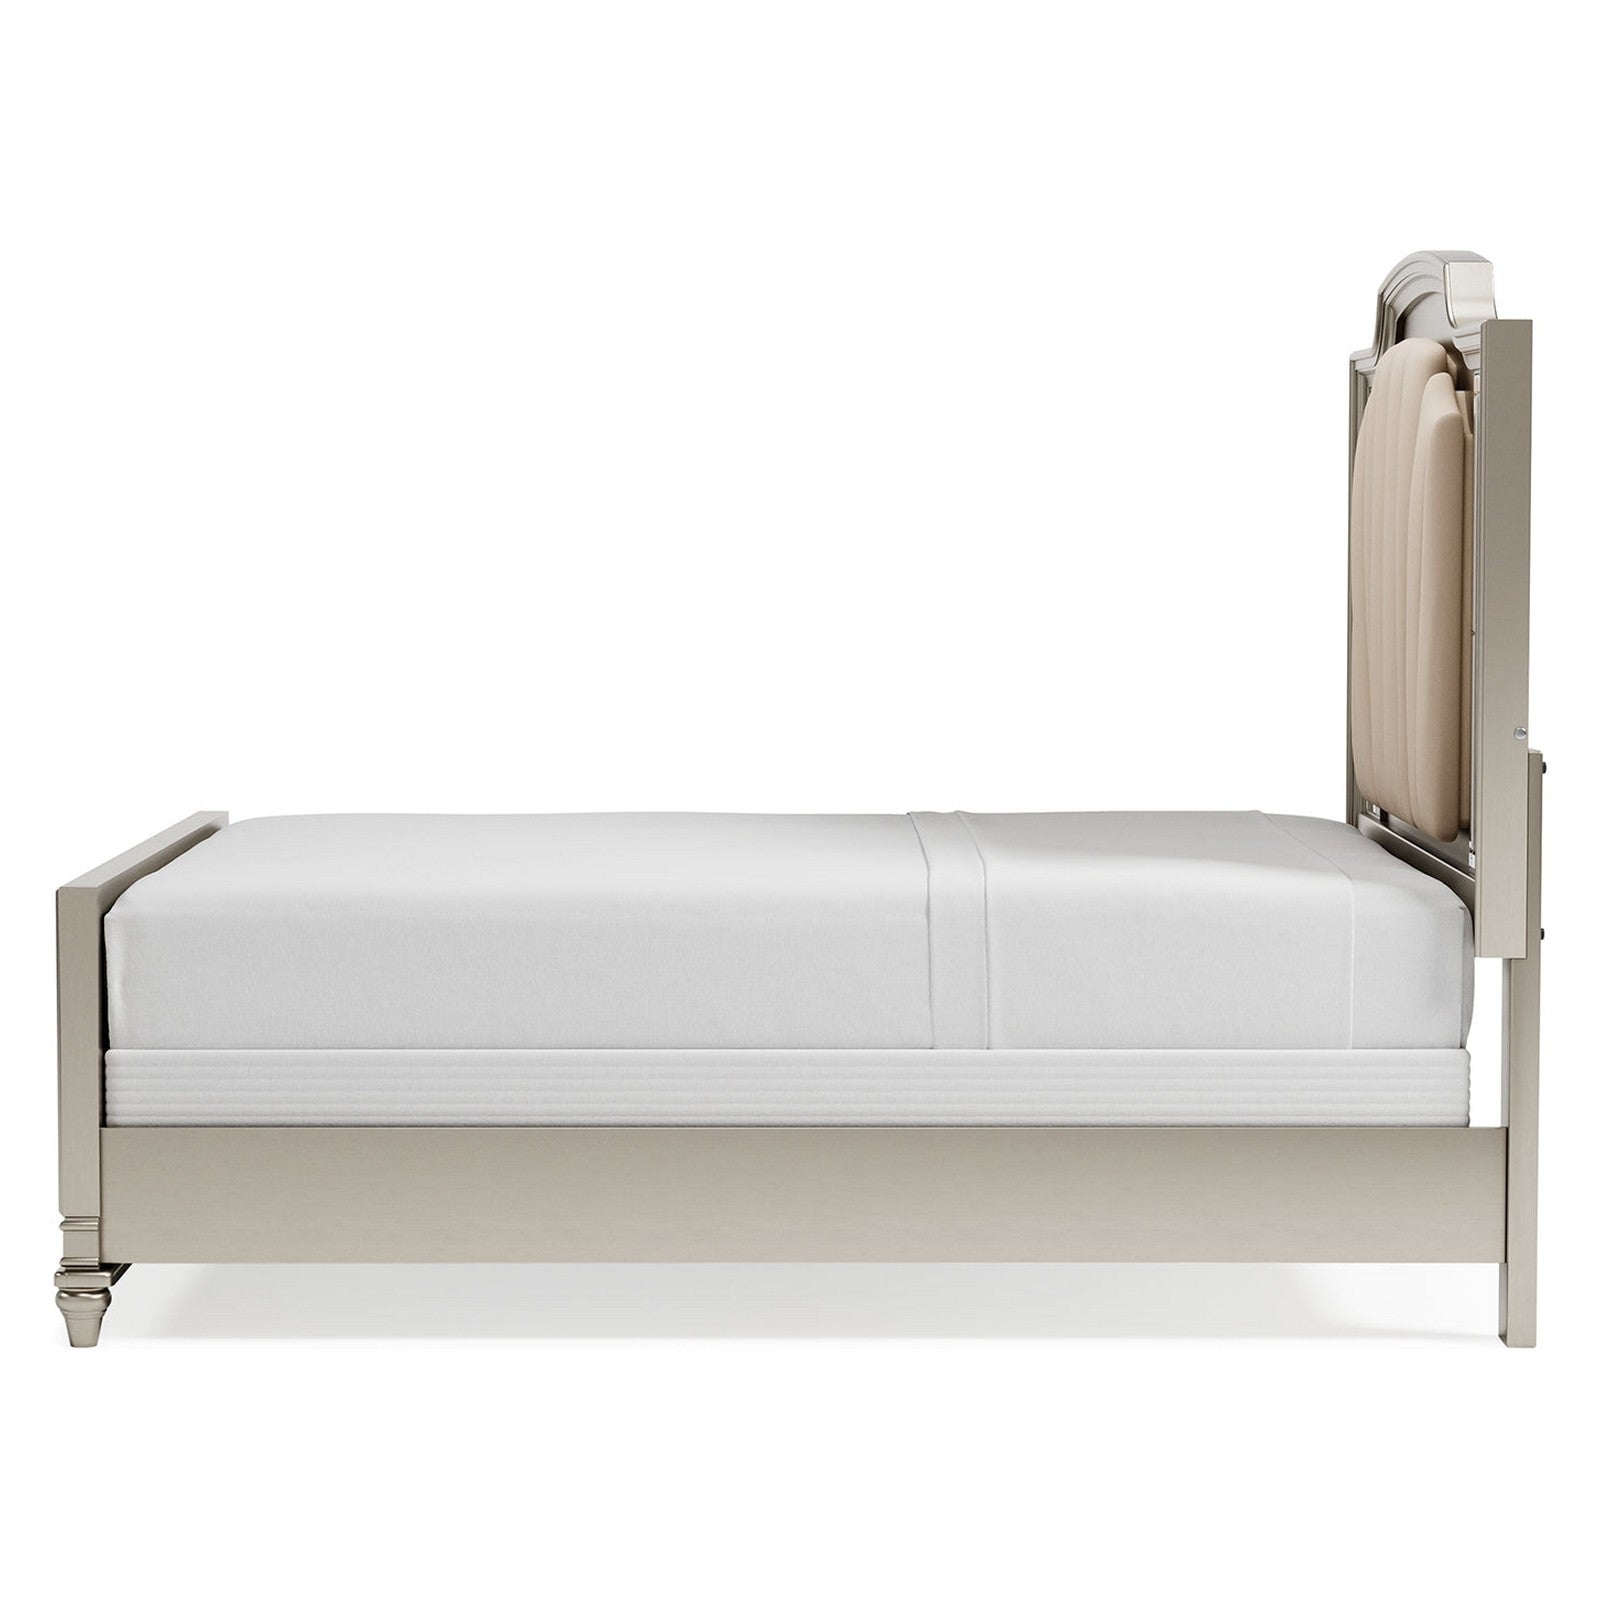 Chevanna Upholstered Panel Bed